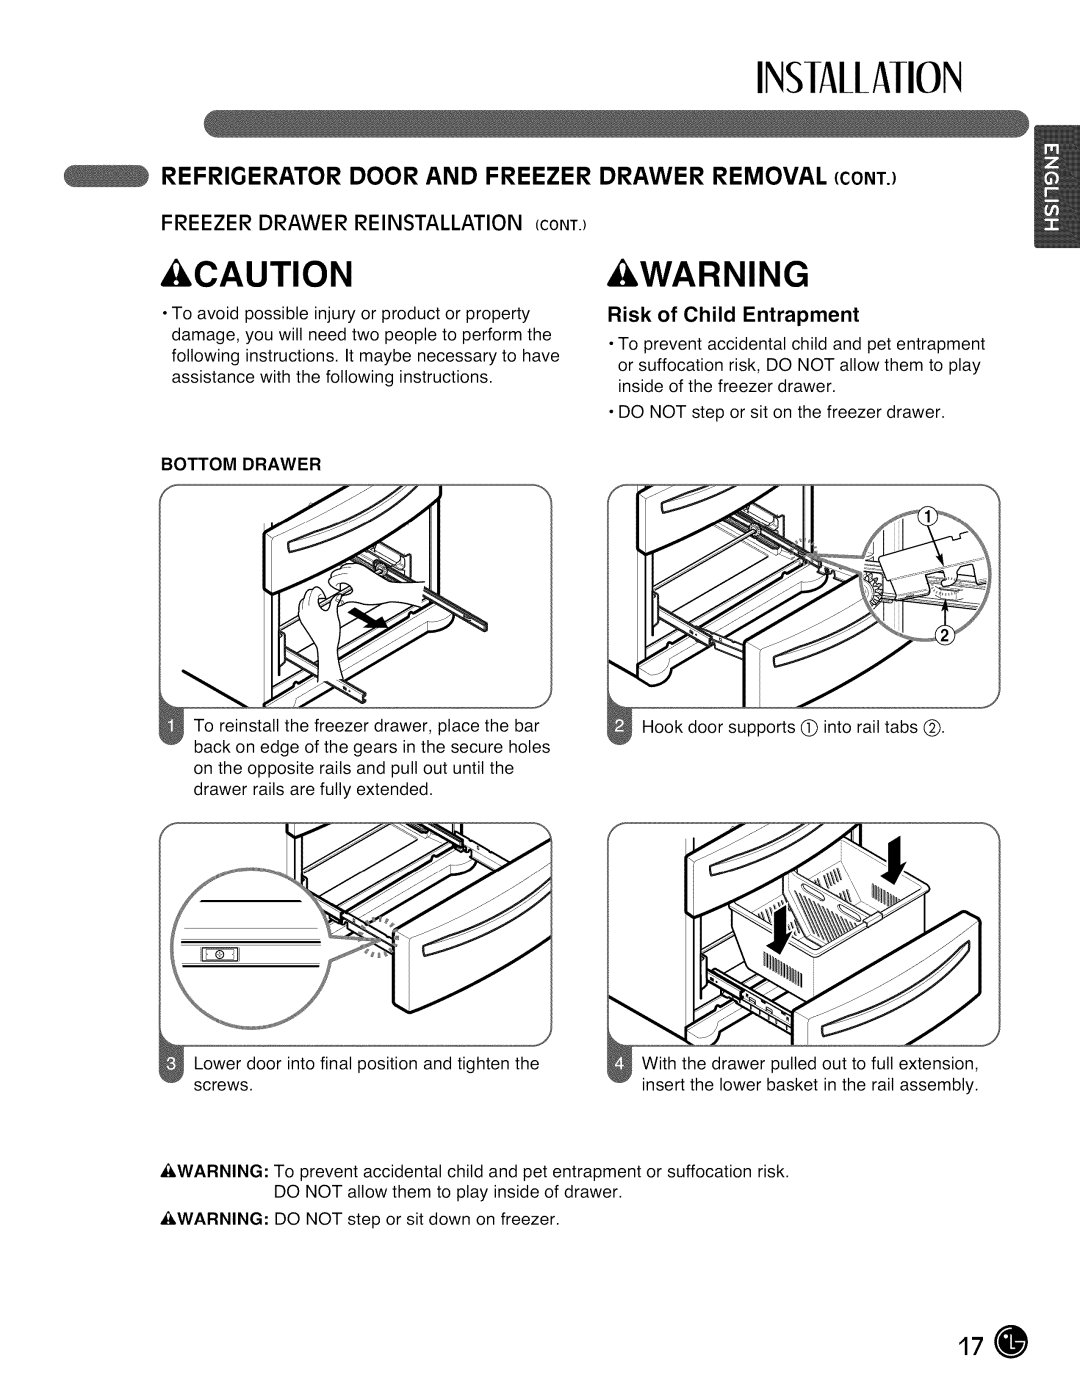 LG Electronics LMX28988 manual Freezer Drawer Reinstallation Cont, INSIAllAIION, Caution&Warning, Risk of Child Entrapment 